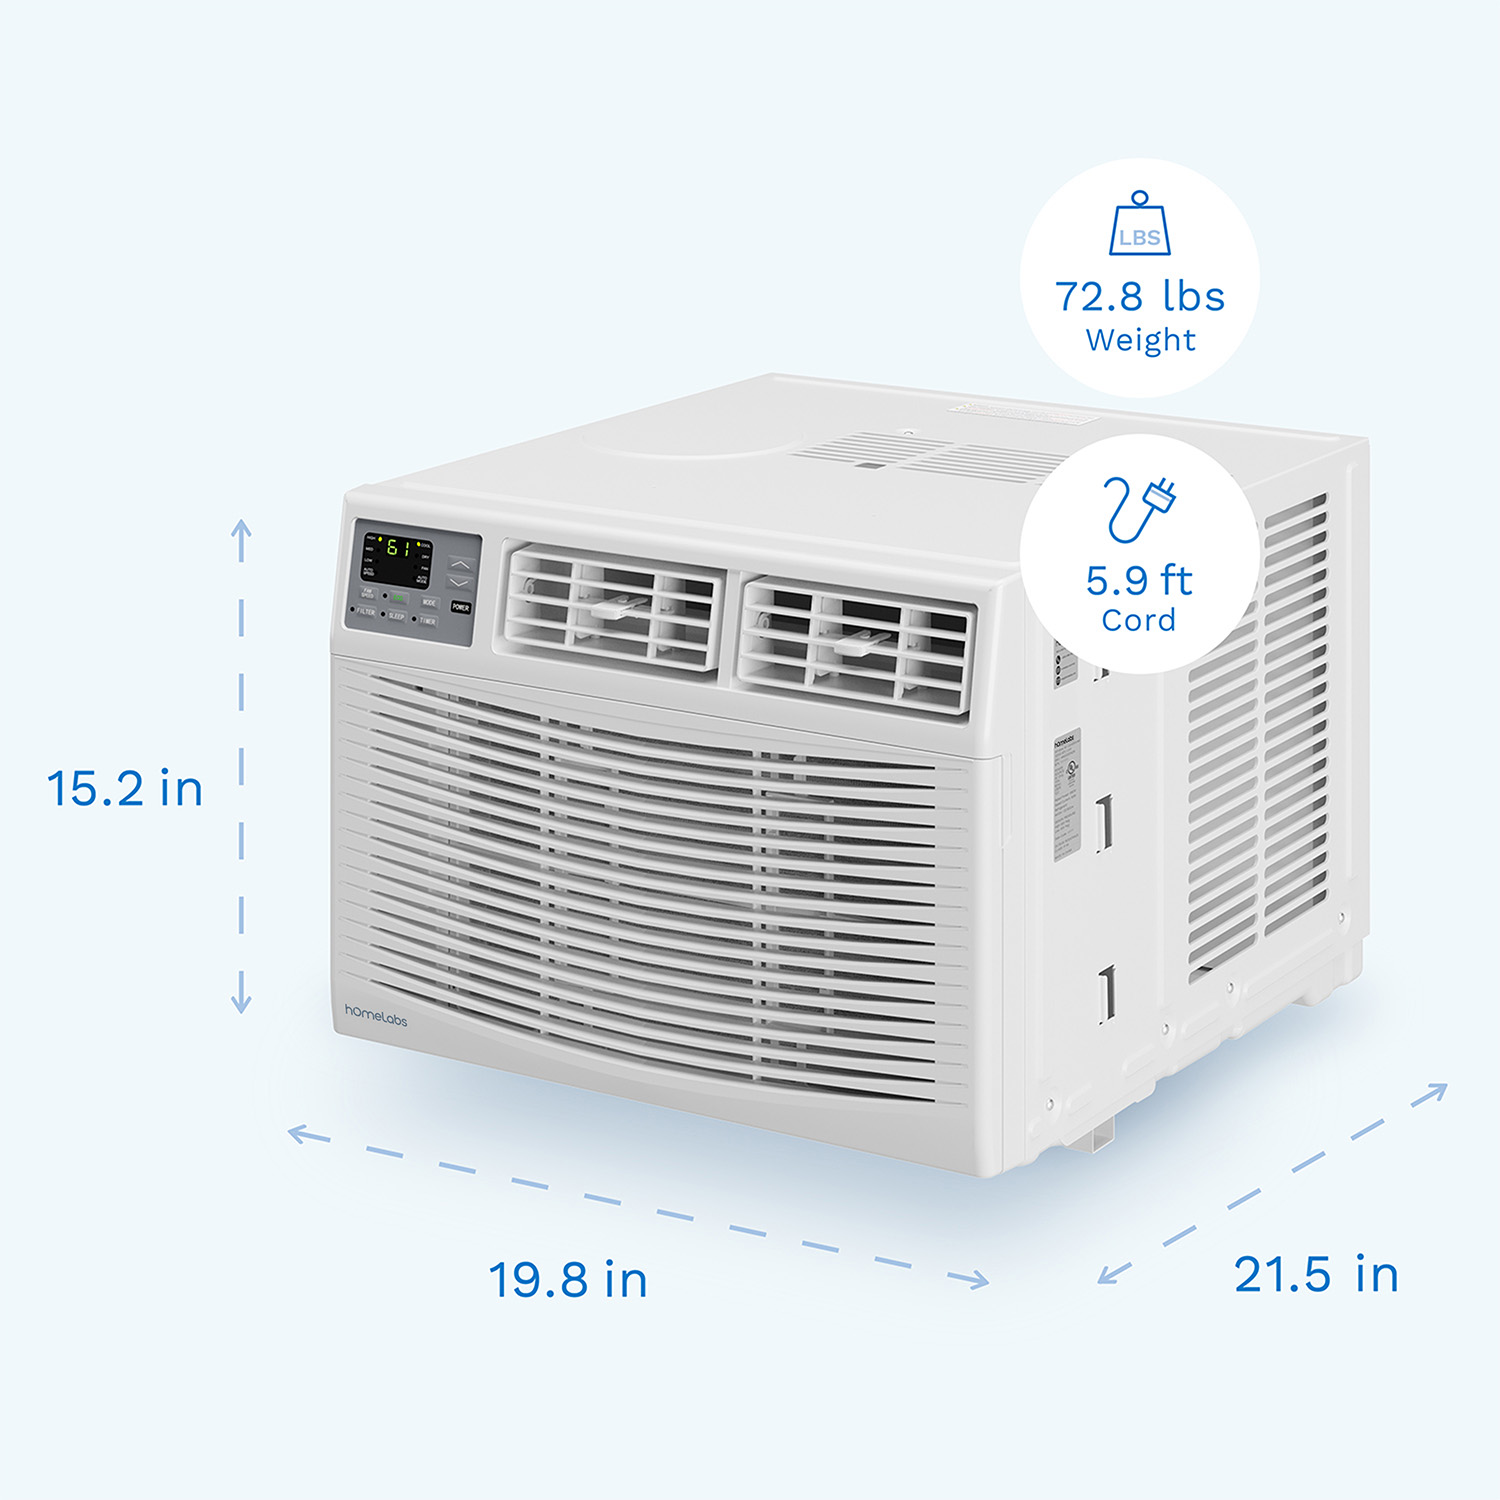 hOmeLabs 12,000 BTU Window Air Conditioner - Energy efficient AC Unit with Digital Thermostat and Easy-to-Use Remote Control - Ideal for Rooms up to 550 Square Feet - image 2 of 10